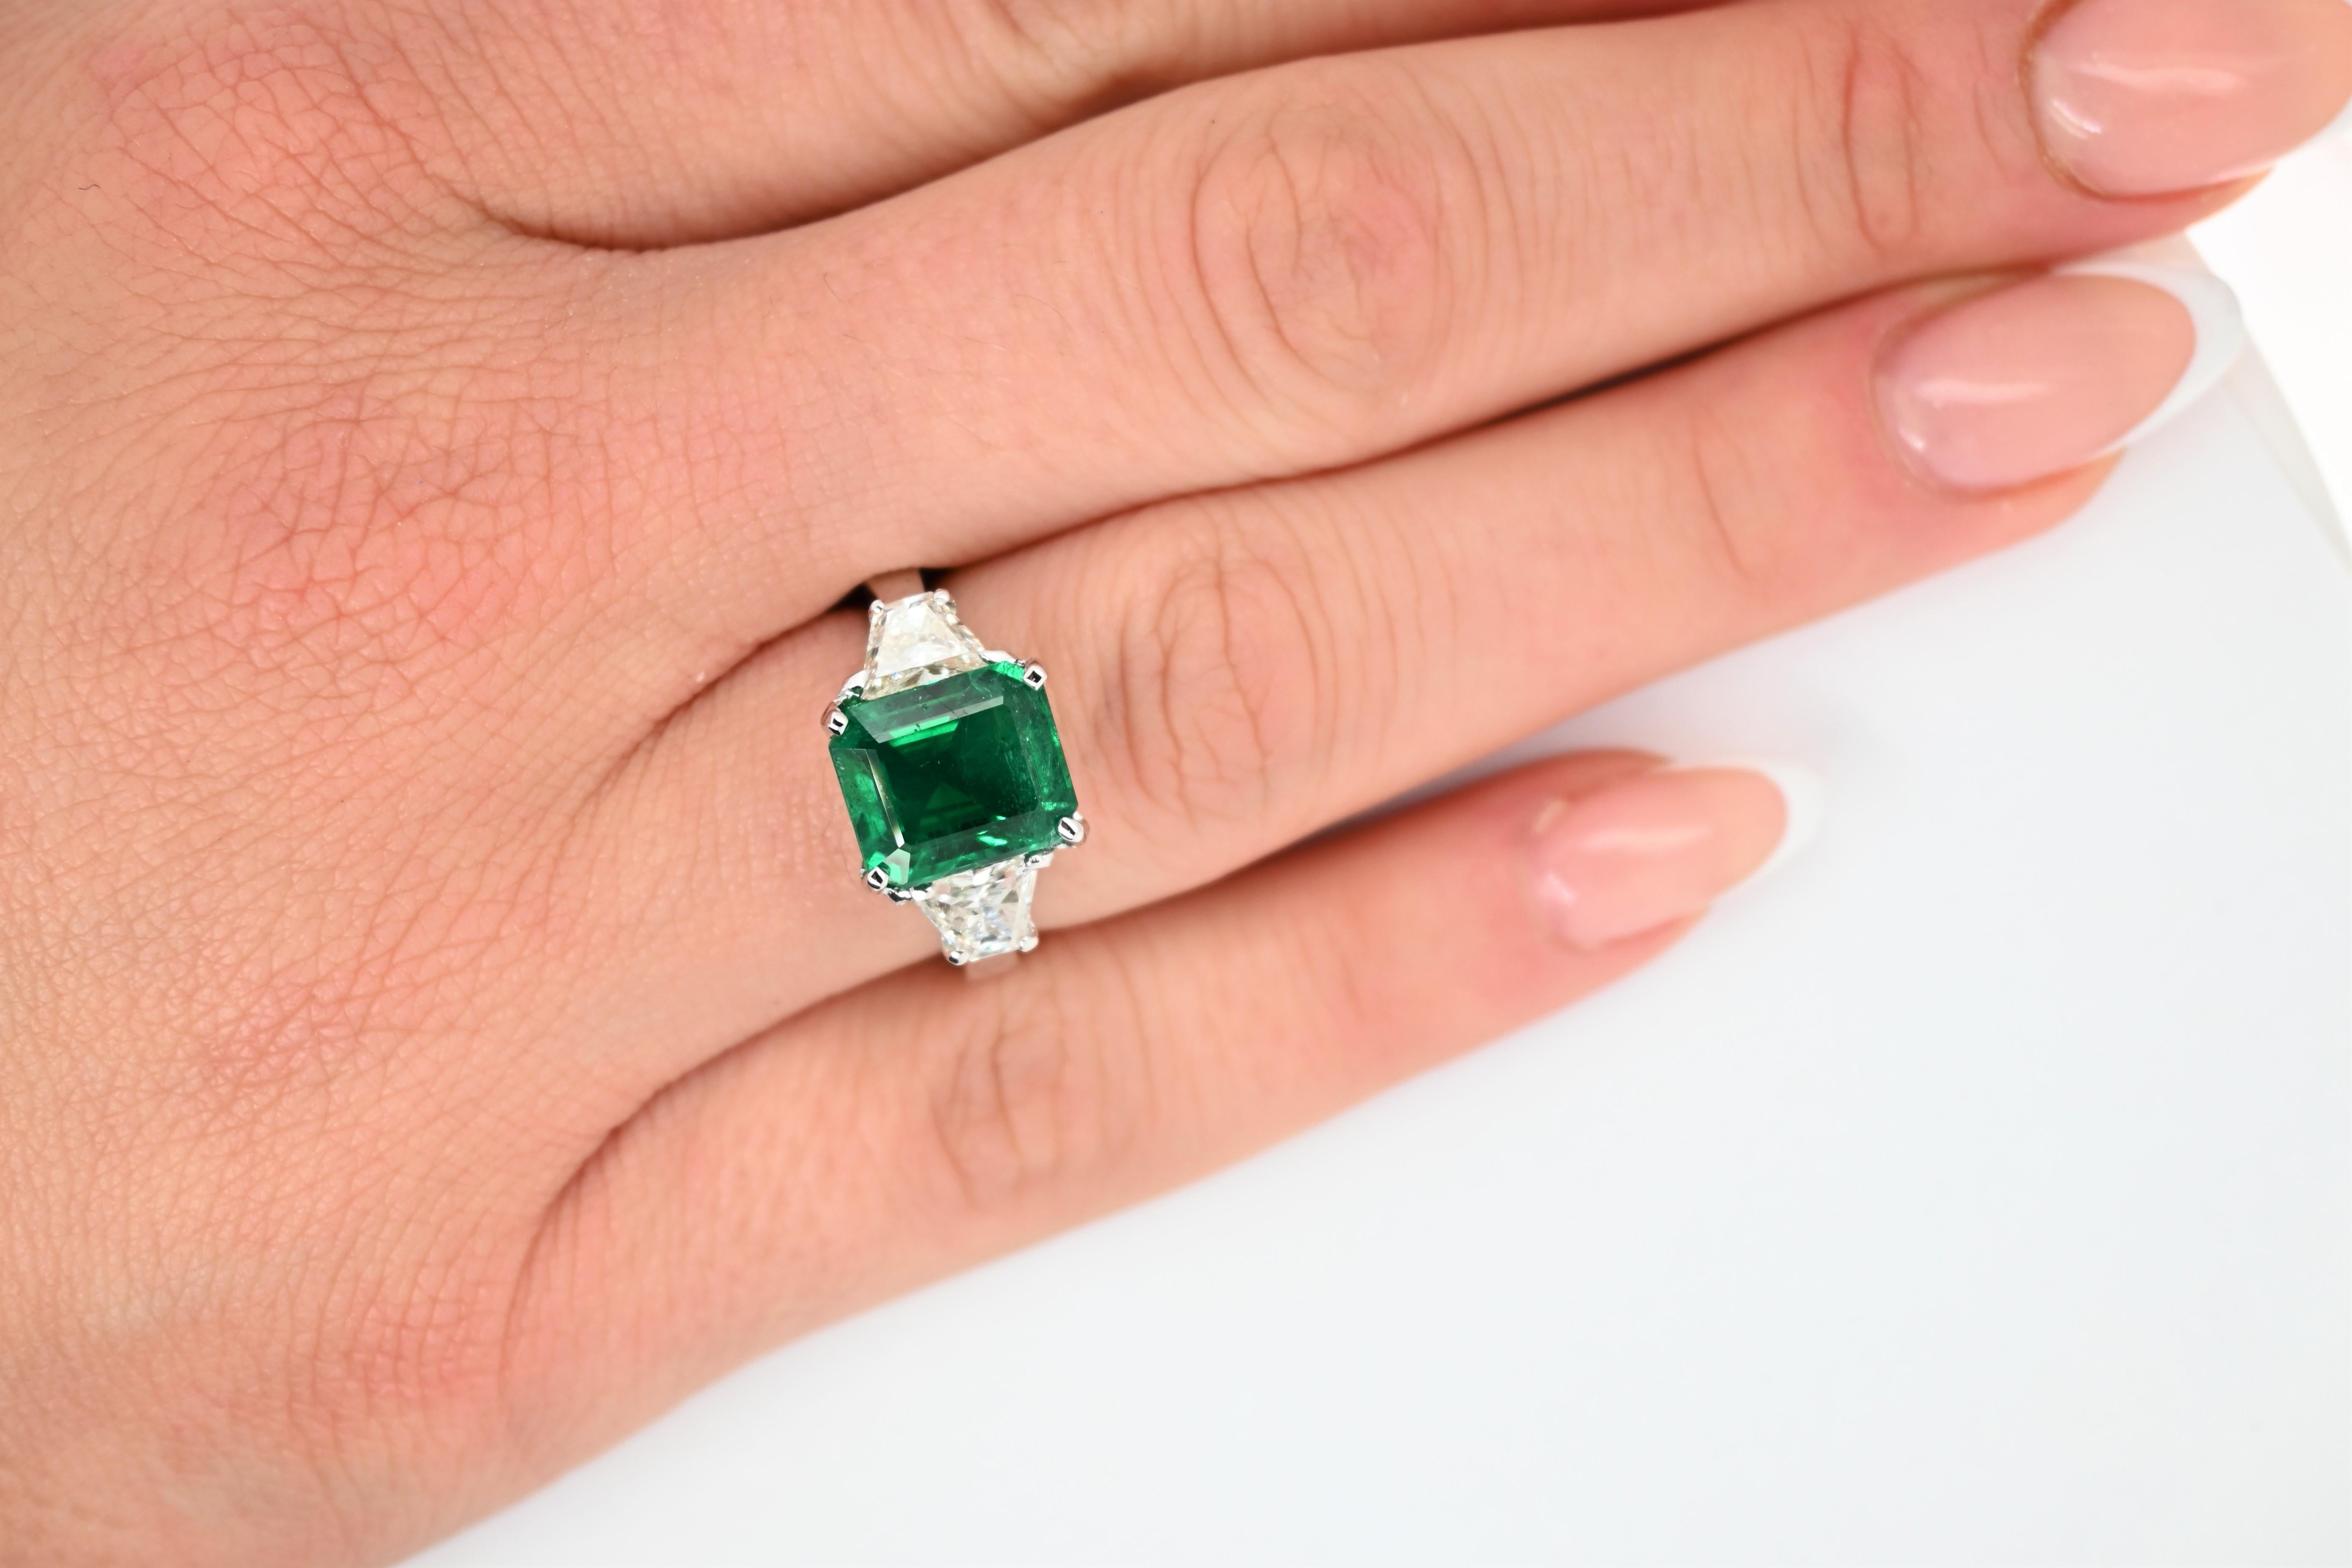 Original Magnum Creations Ring, features 0.95 carats of two white diamonds on the sides, and 4.05 carats of emerald as a center stone, mounted on a platinum casting.

This ring is impressive, the deepness of the center emerald and the shine of the